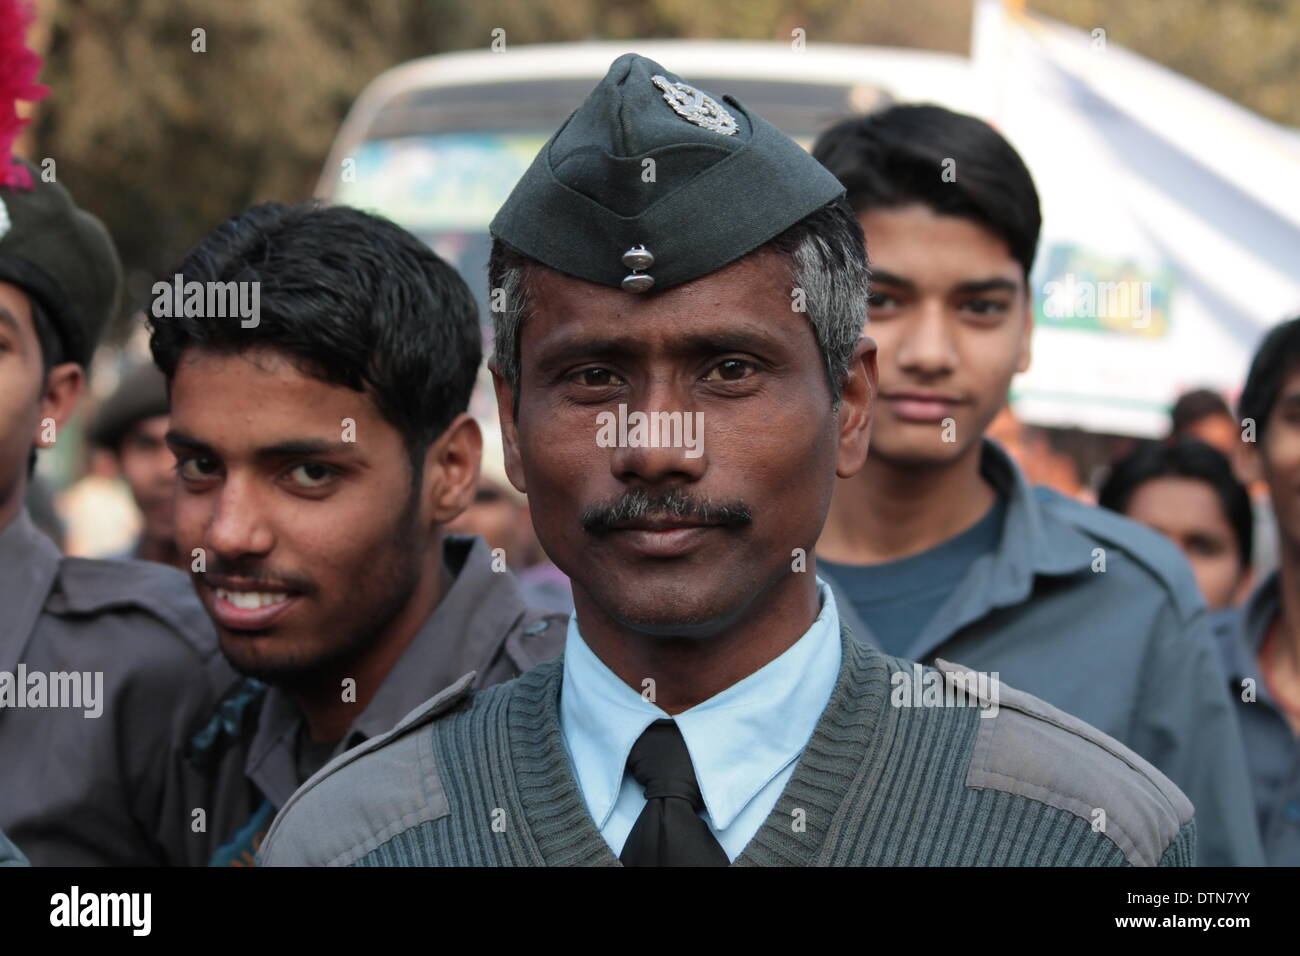 Gandhi Maidan, Patna, Bihar, India, 21st February 2014. National Cadet Corpse cadets organize awareness campaign to promote National Youth Policy 2014 on theme “Enabling India’s Youth to Realize Their Dreams’. Credit:  Rupa Ghosh/Alamy Live News. Stock Photo